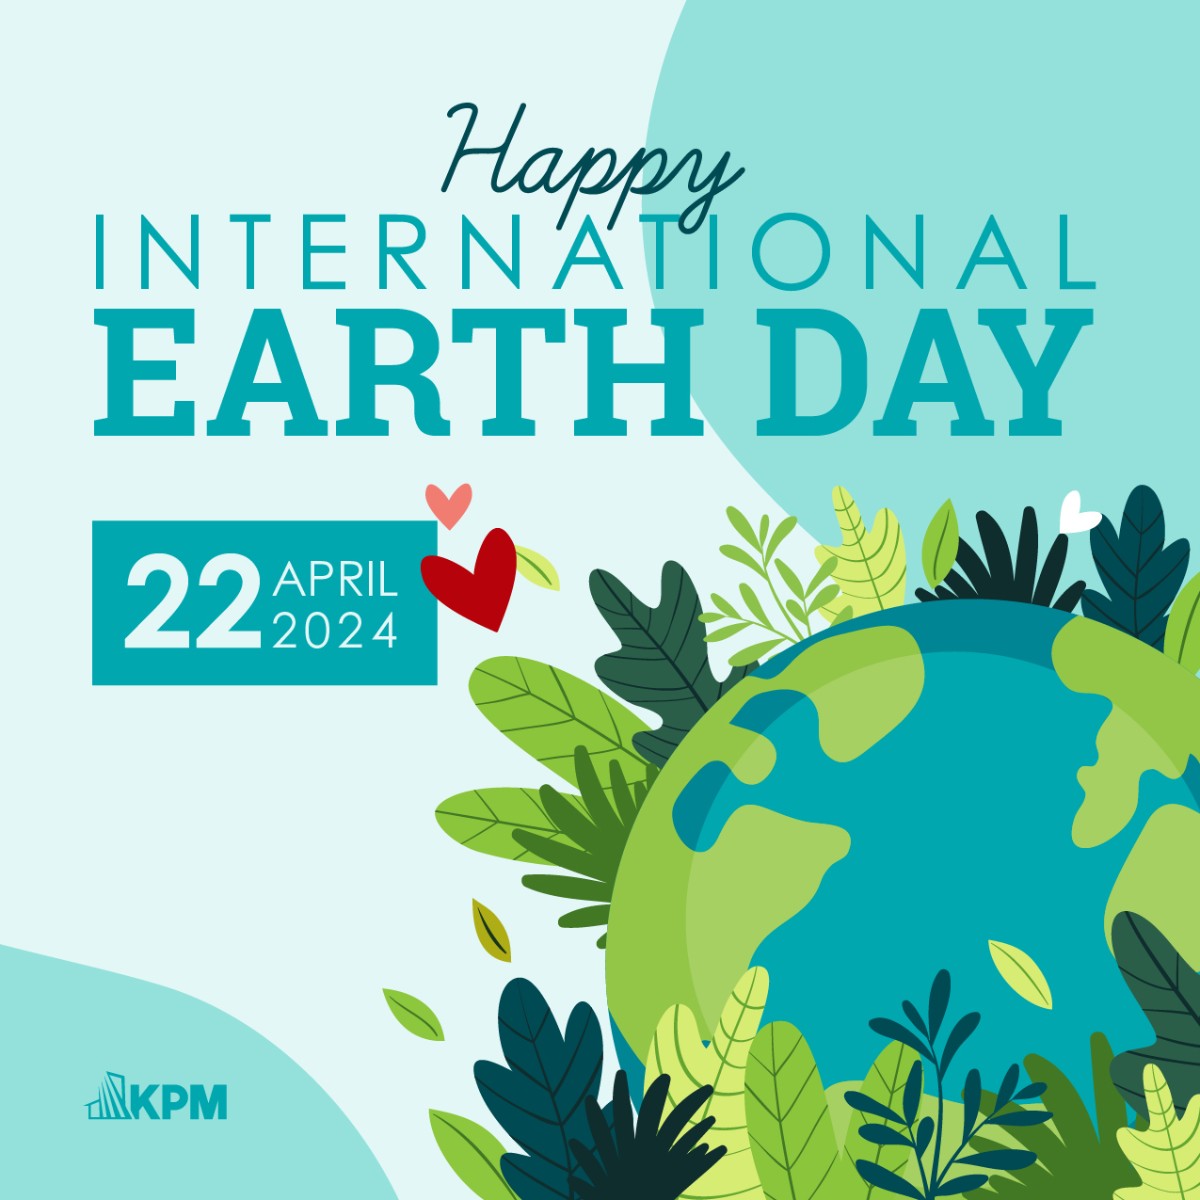 Today and every day, let's celebrate our beautiful planet and commit to making eco-friendly choices.  From reducing waste to conserving energy.
Happy Earth Day! 
#EarthDay #Sustainability #KPMPropertyManagement #Apartmement #Rent #Nature #Ecofriendly #Home #HomeOfNature